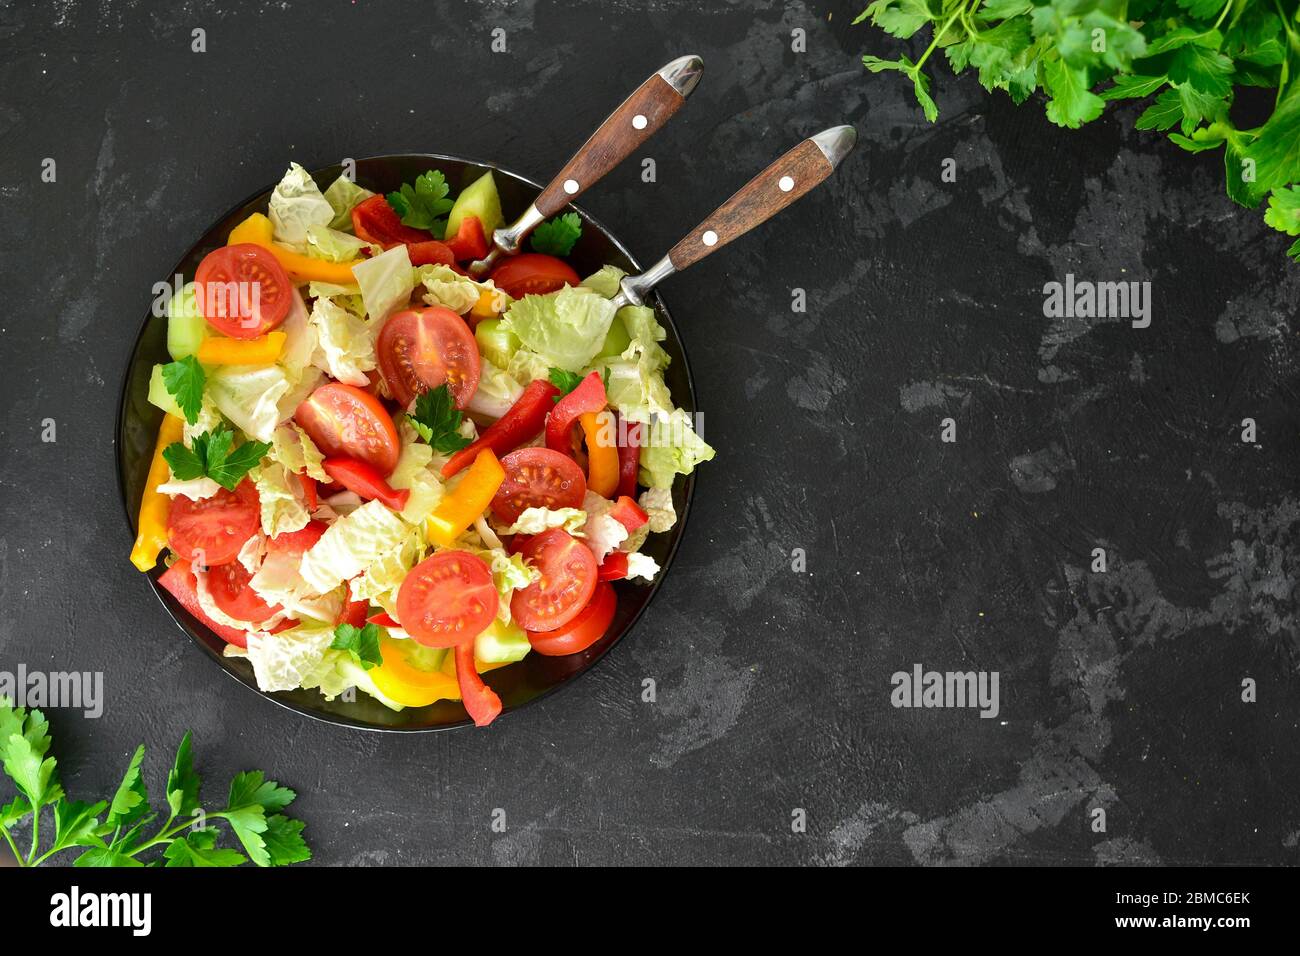 Spring vegetable salad. Salad, tomatoes, cabbage, dressing, bell pepper, cucumber, parsley. Dark background, top view. Healthy vegetarian and vegan Stock Photo